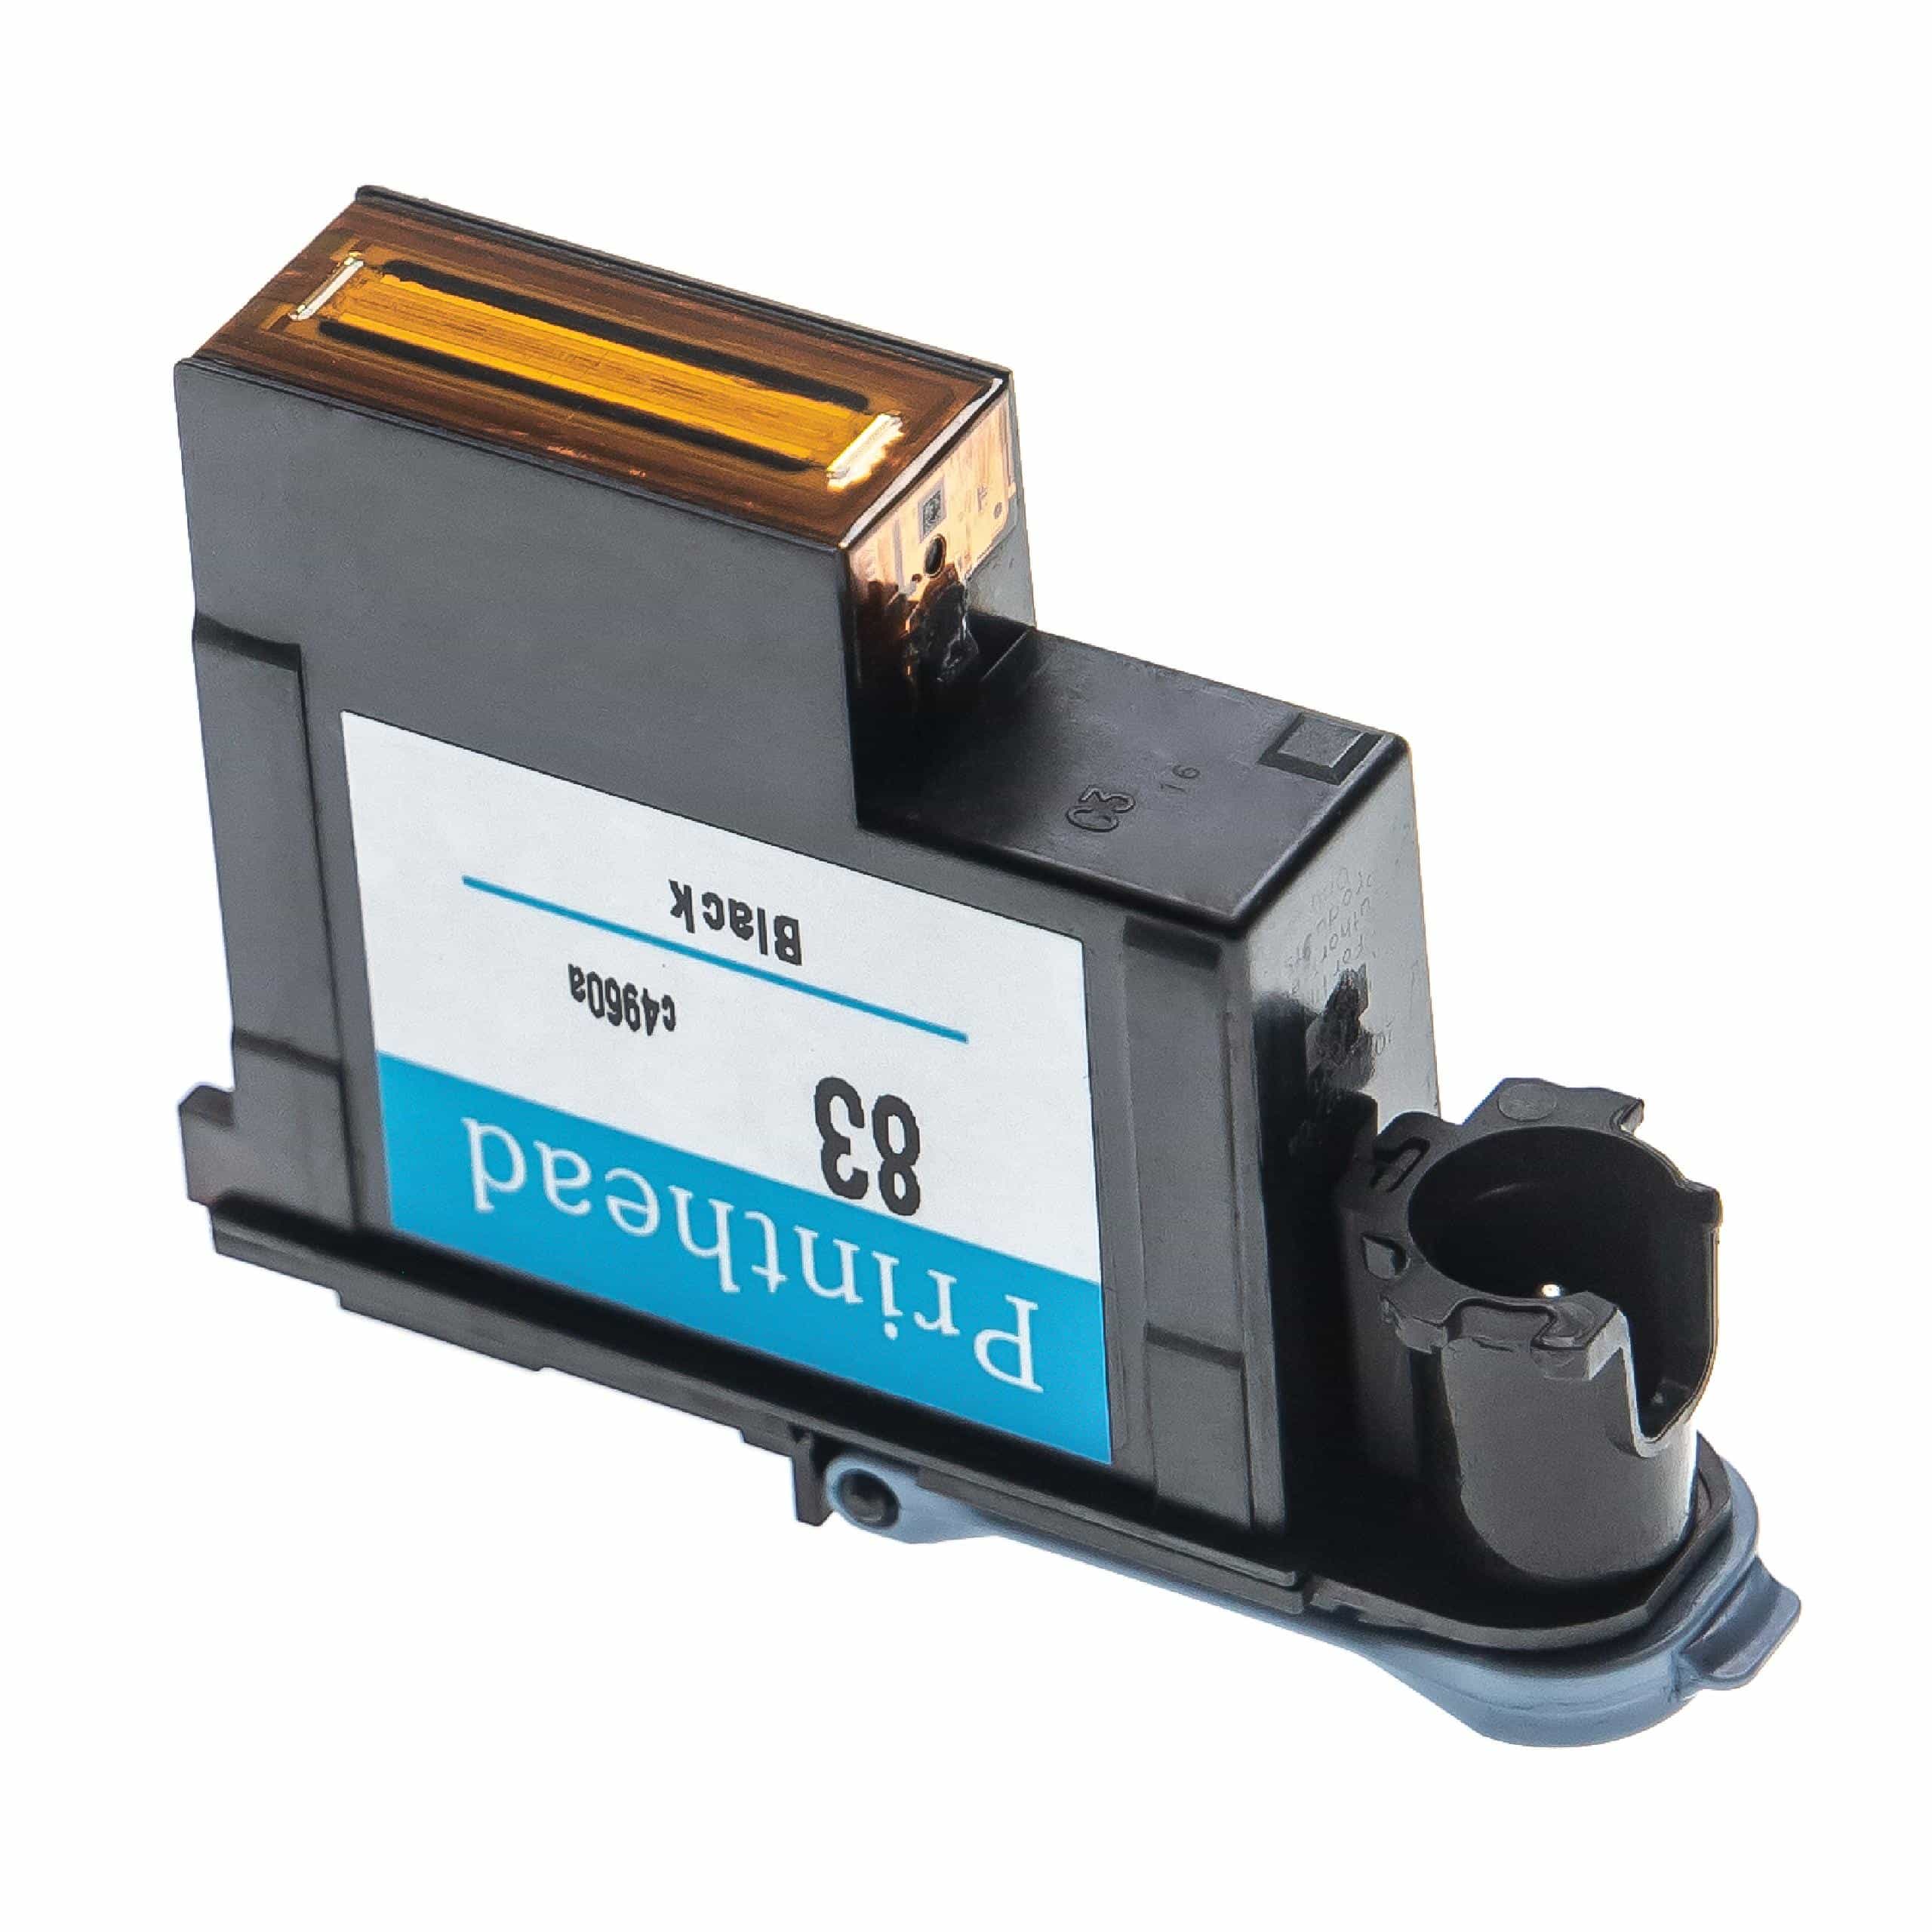 Printhead for HP DesignJet HP C4960A Printer - 13 ml, black, 6 cm wide, Refurbished, With Cleaner